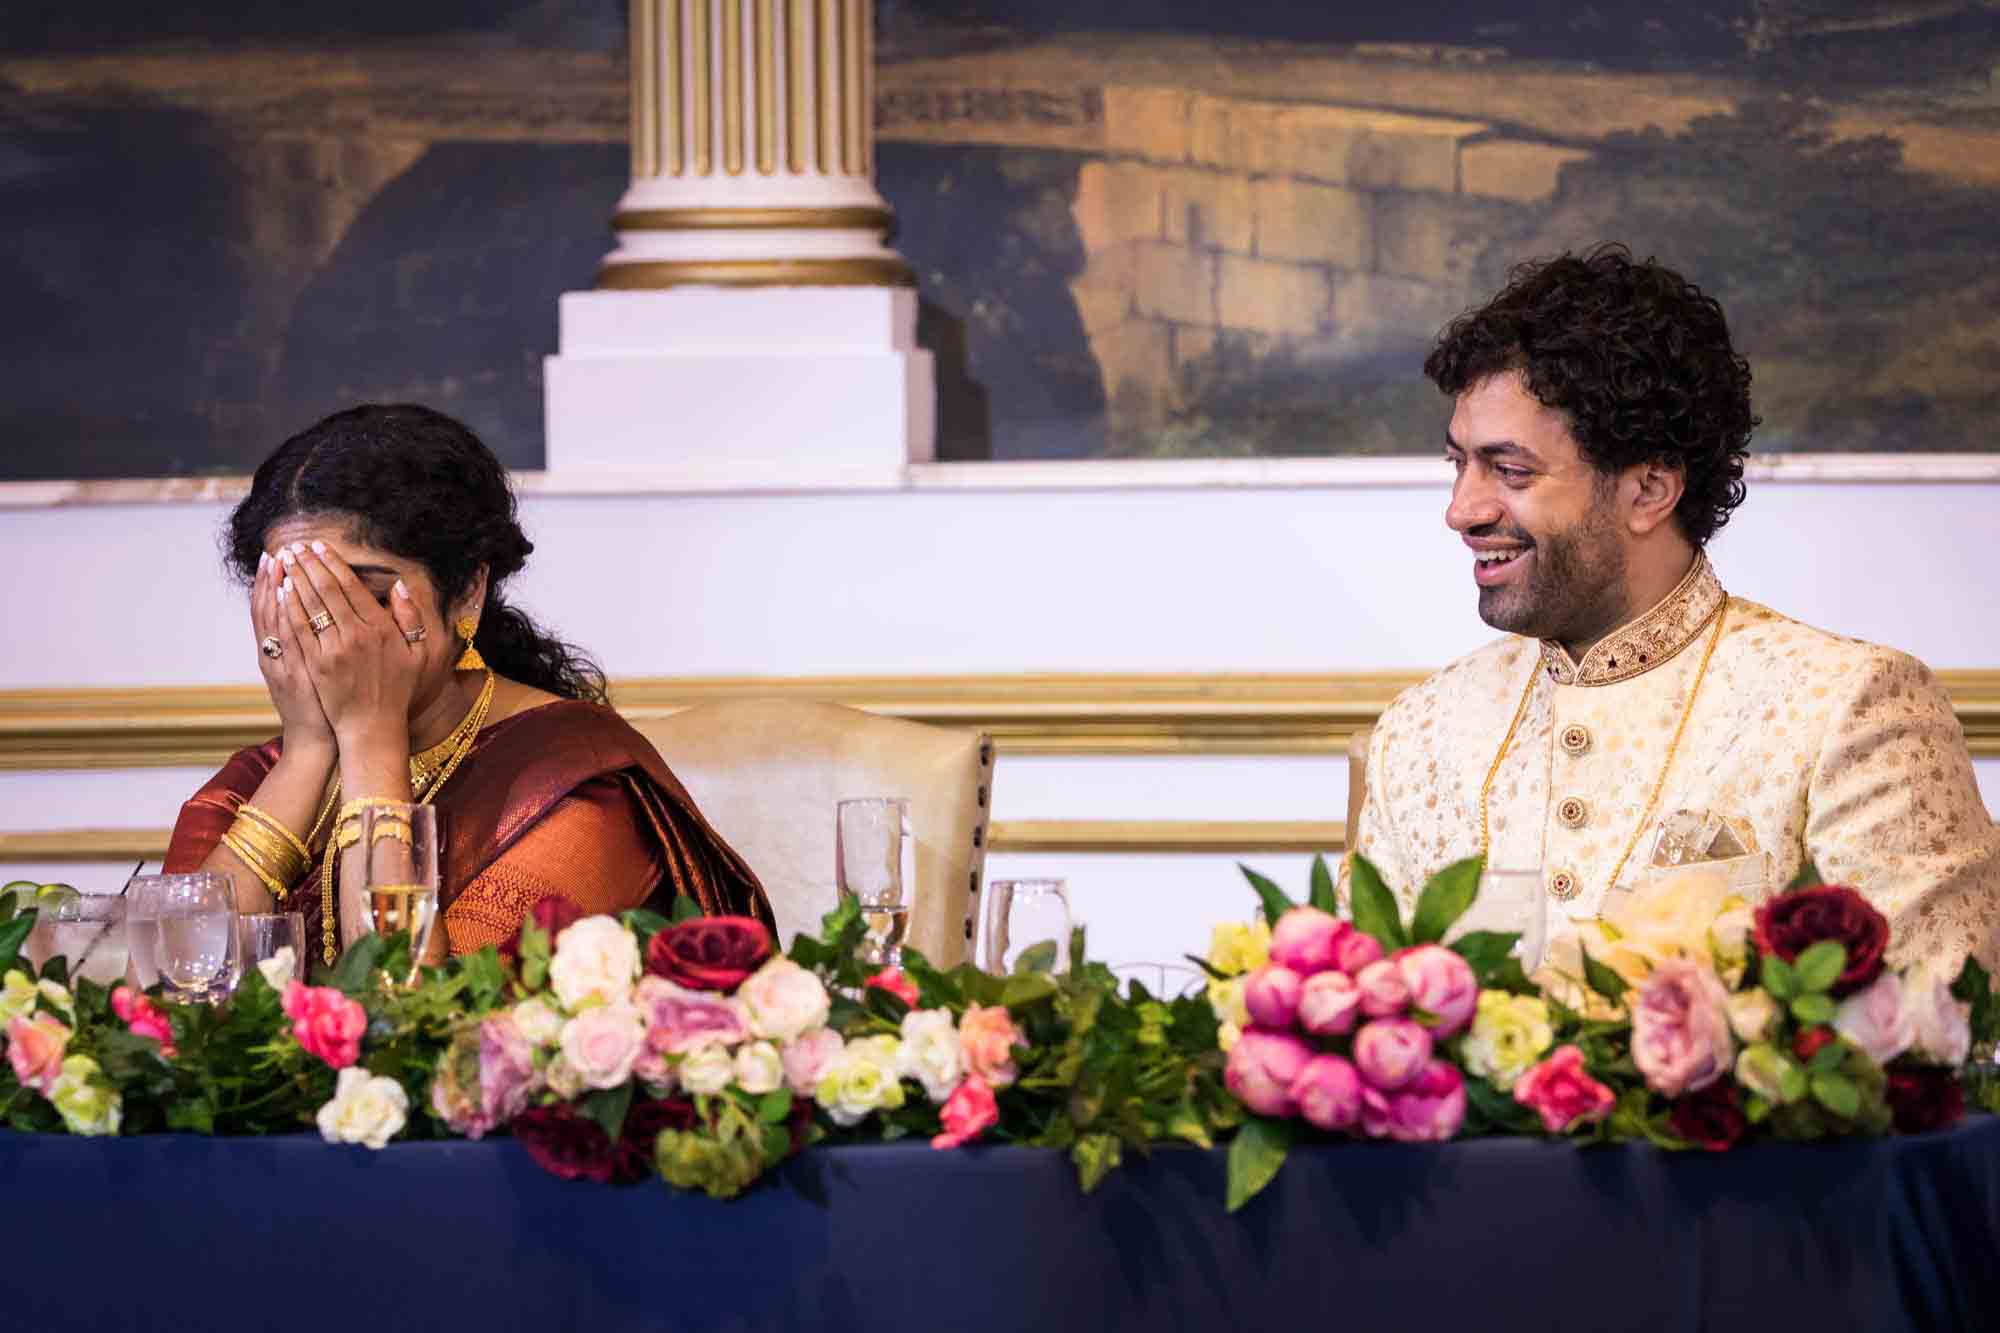 Groom sitting at table watching bride with hands over her face during speeches for an article on Terrace on the Park wedding photo tips